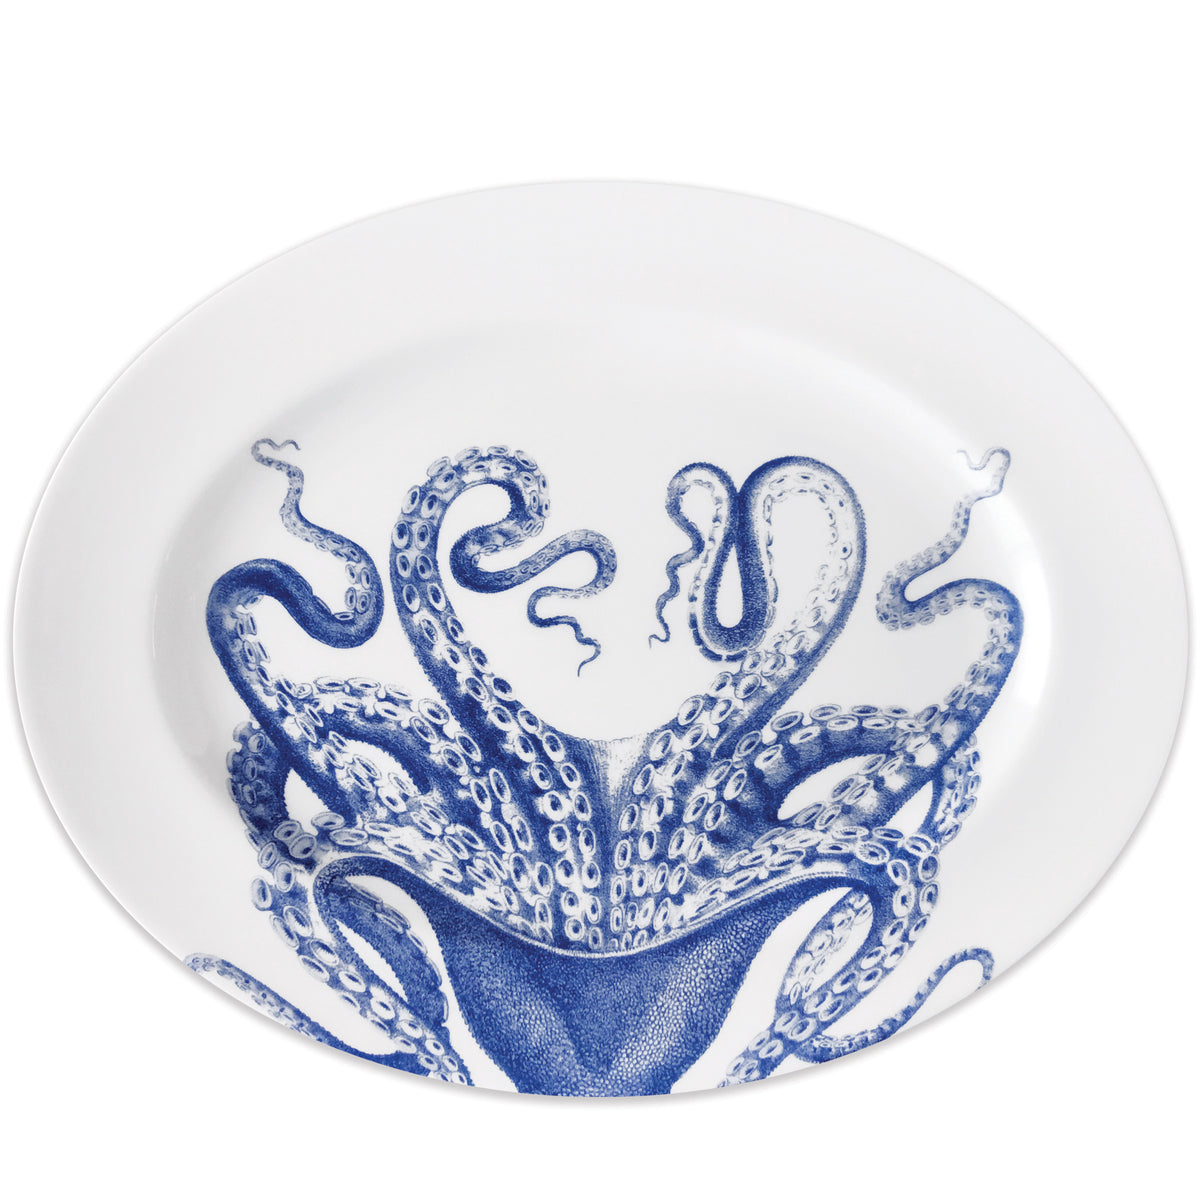 Blue Lucy the Octopus Large Oval Rimmed Platter in blue and white high-fired porcelain dinnerware- Caskata